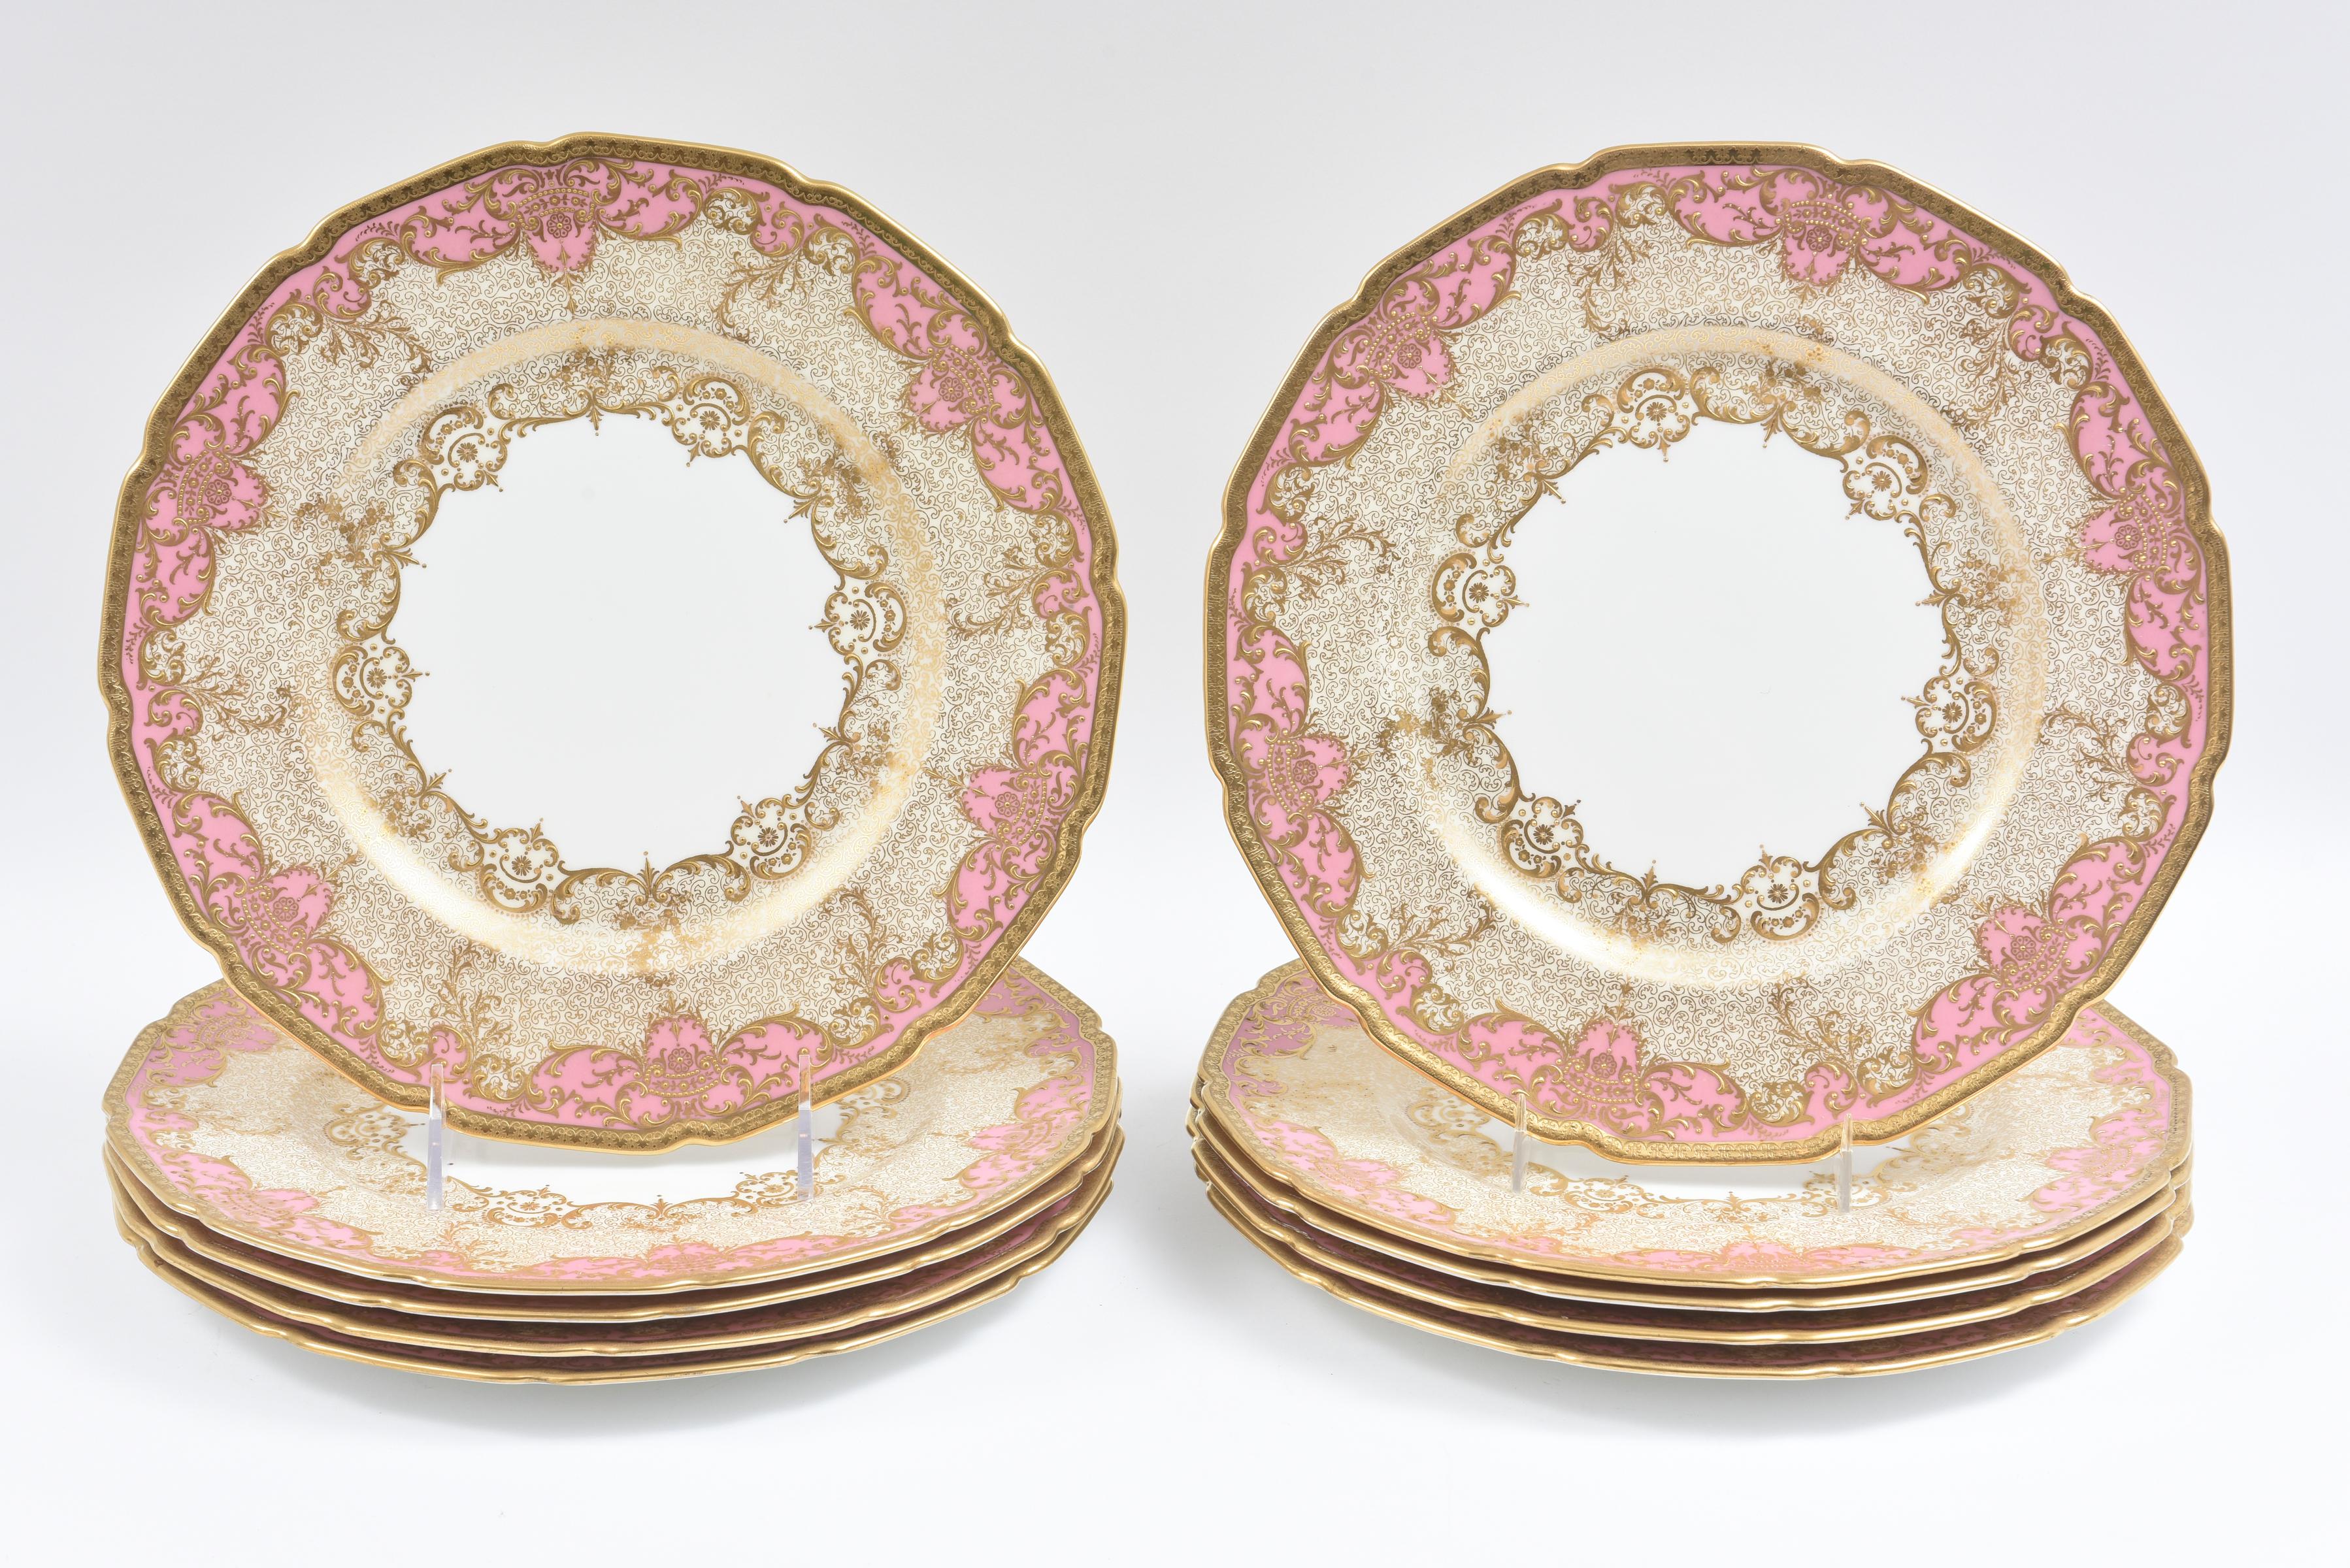 antique pink dishes for sale